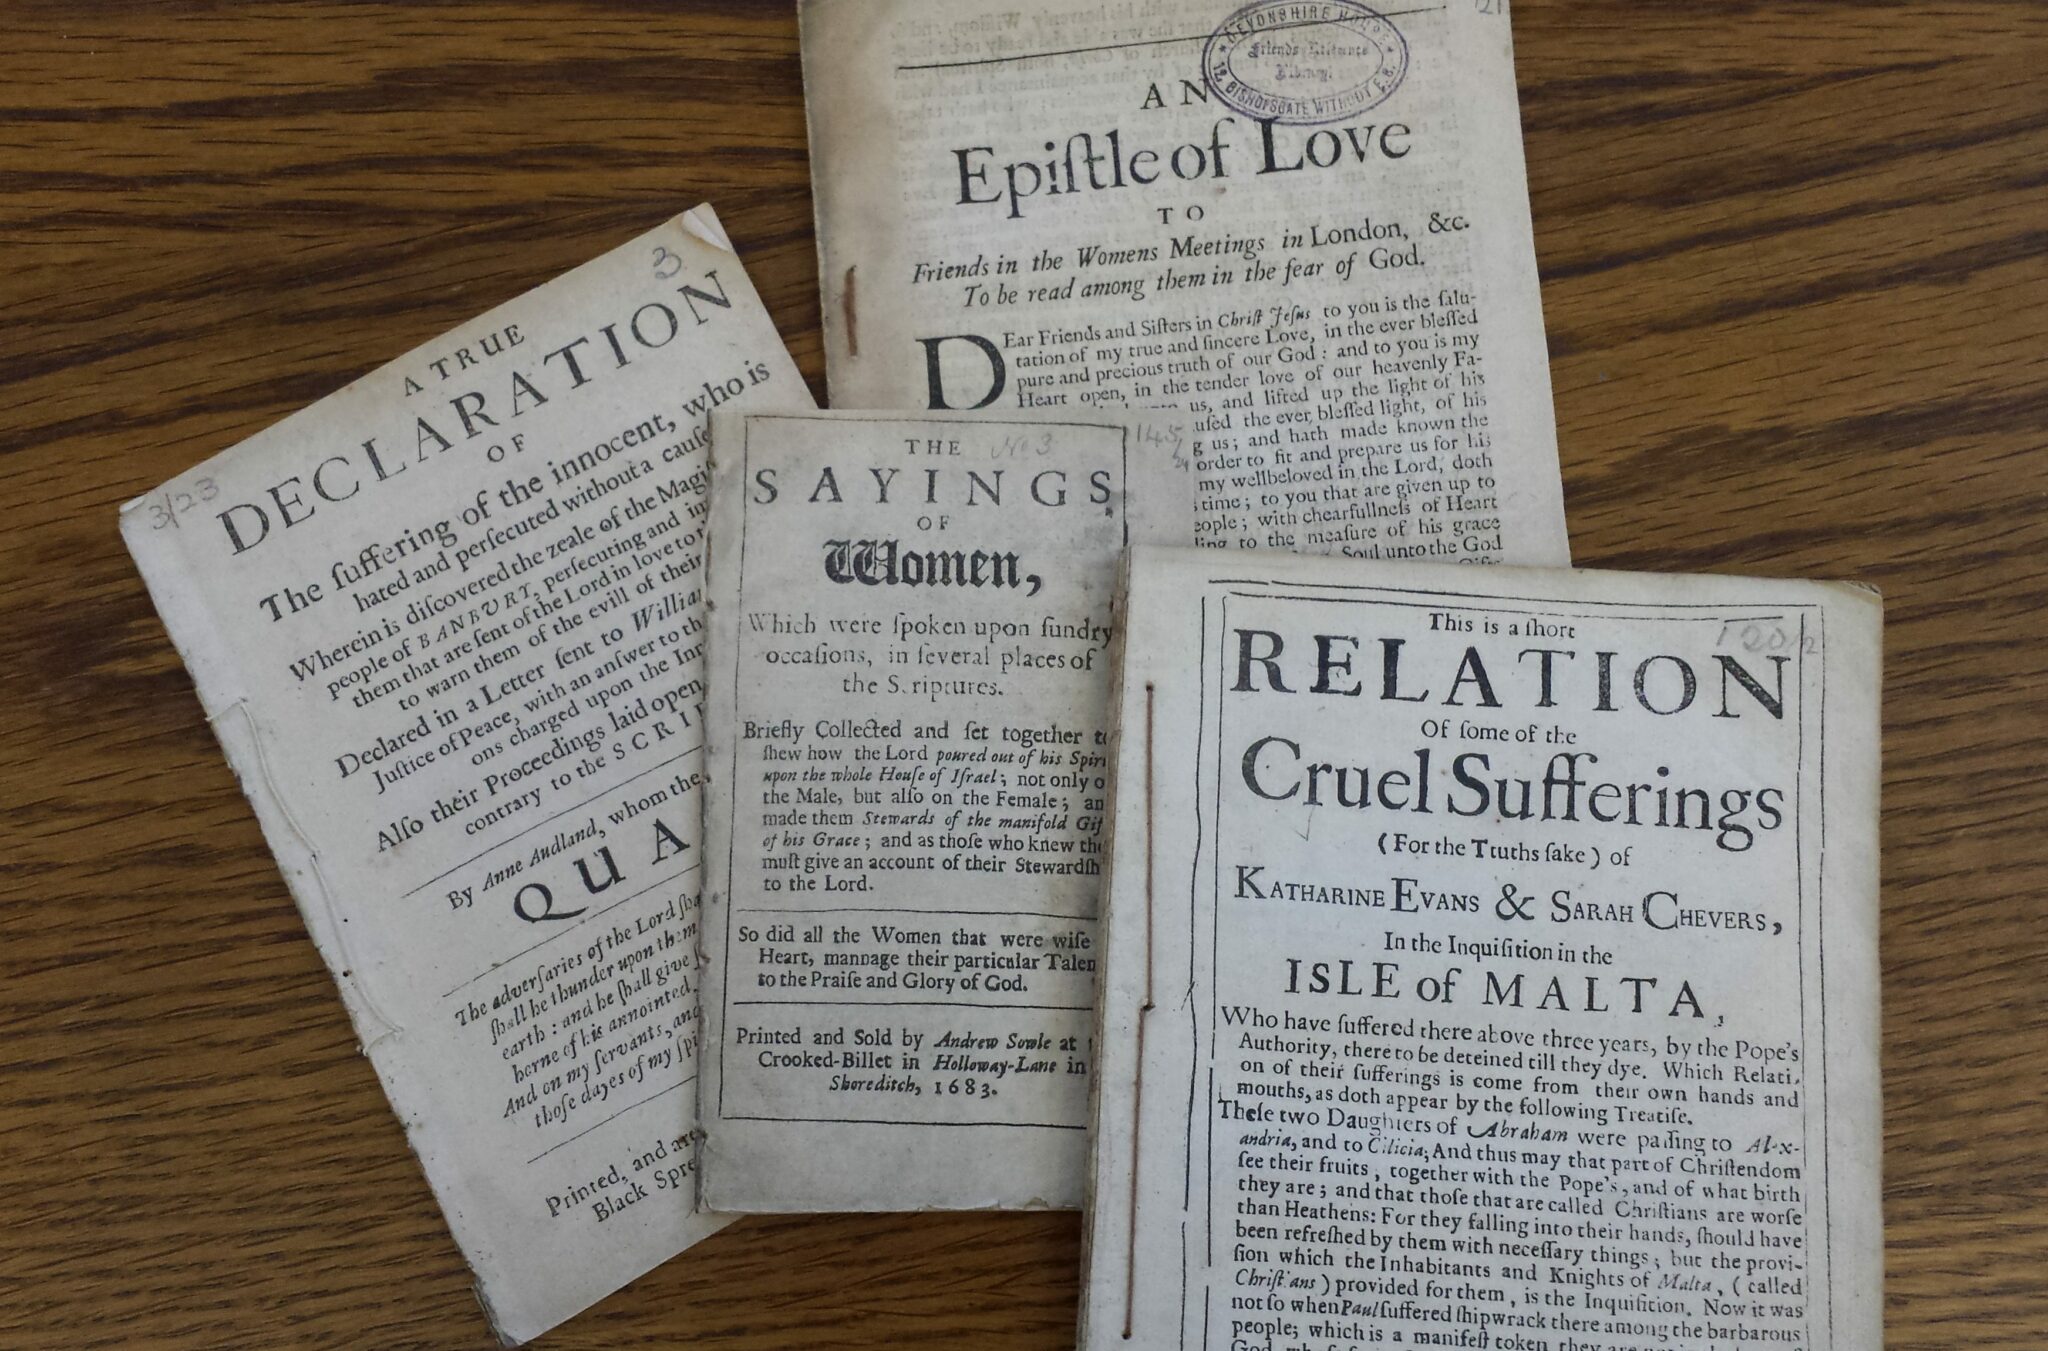 A collection of early quaker pamphlets by women on a wooden desk